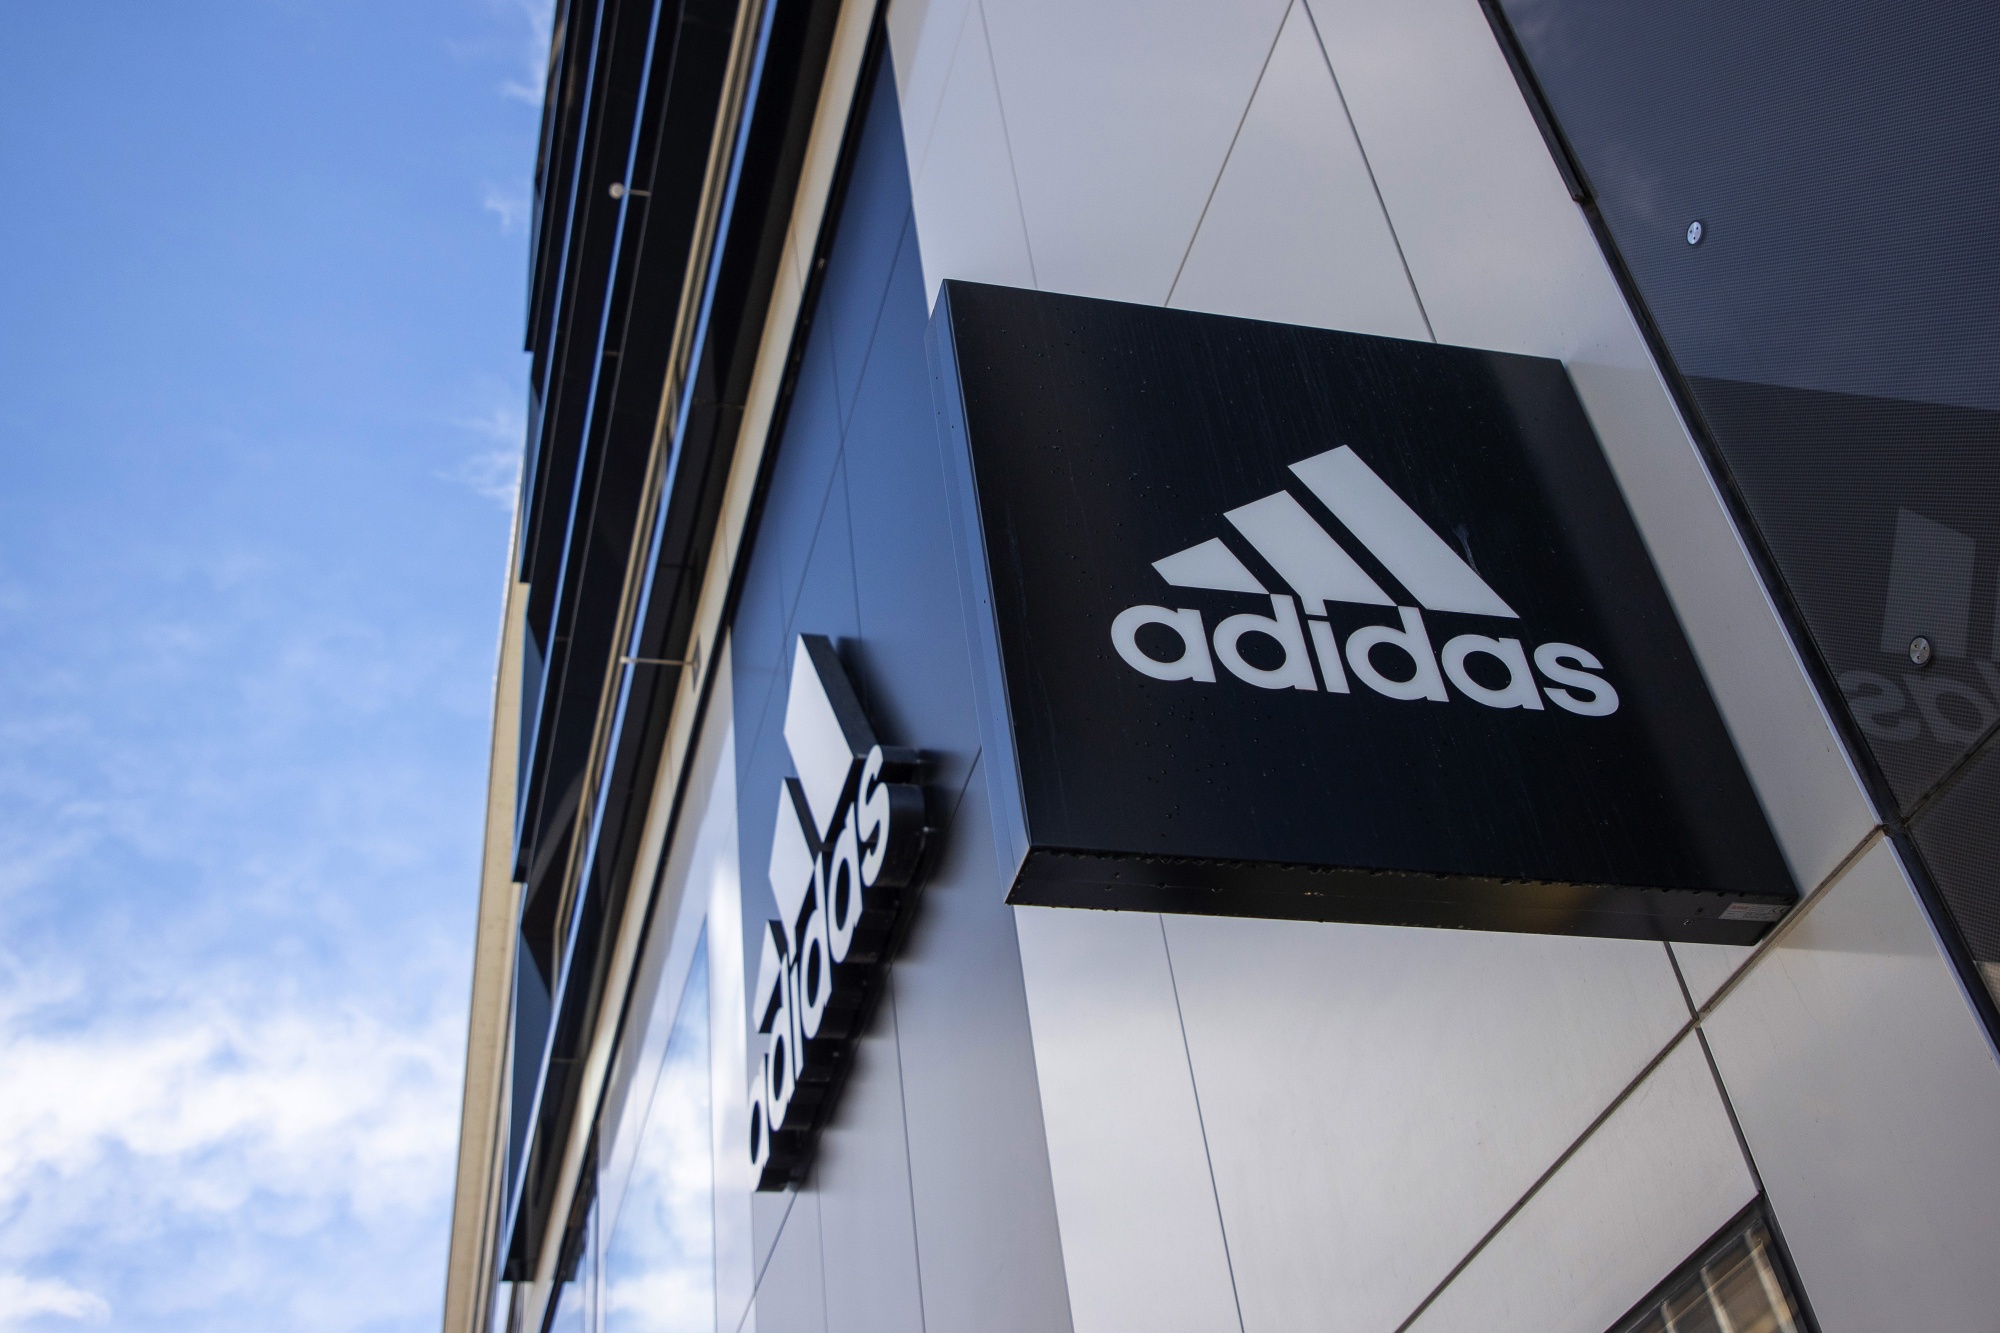 ADS: adidas AG Price Xetra - Bloomberg Markets